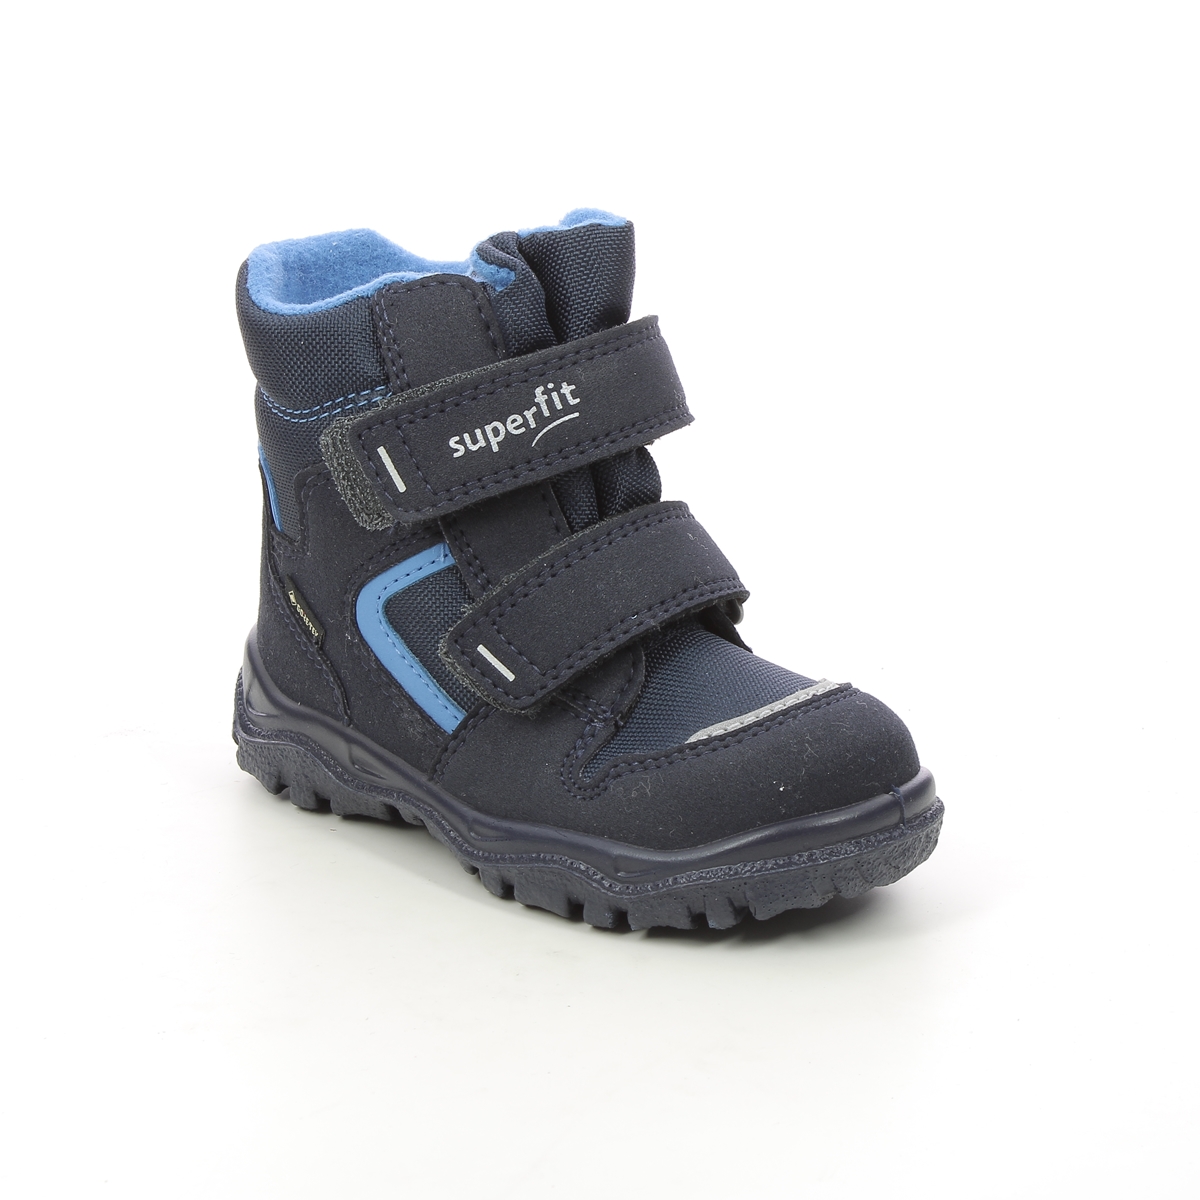 Superfit Husky Inf Gtx Navy Kids Toddler Boys Boots 1000047-8000 In Size 23 In Plain Navy